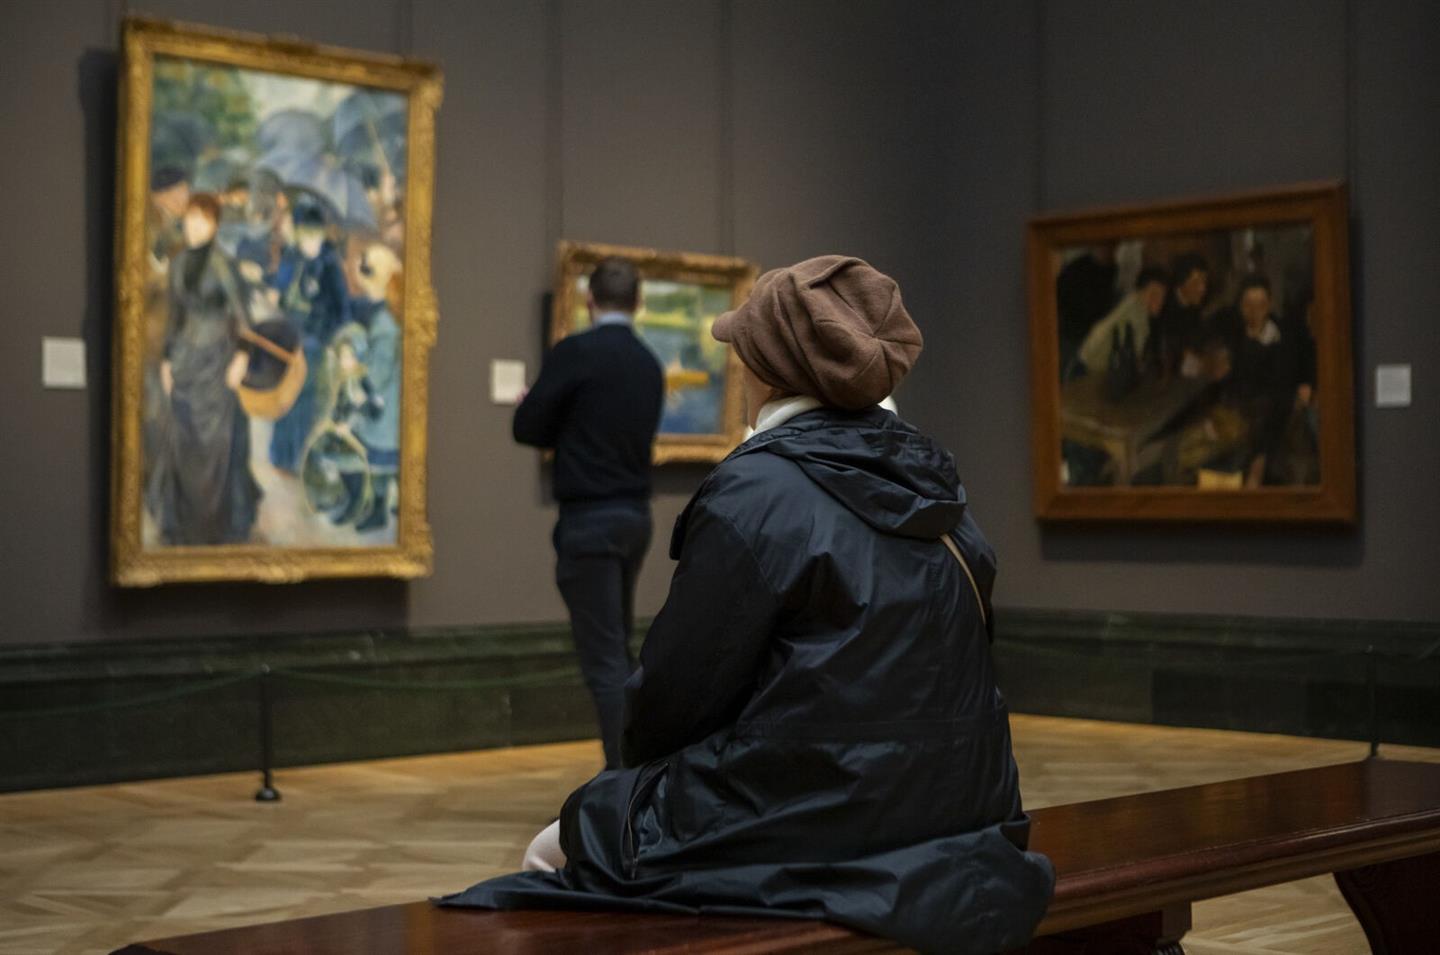 EXHIBITION ON SCREEN: My National Gallery, London 